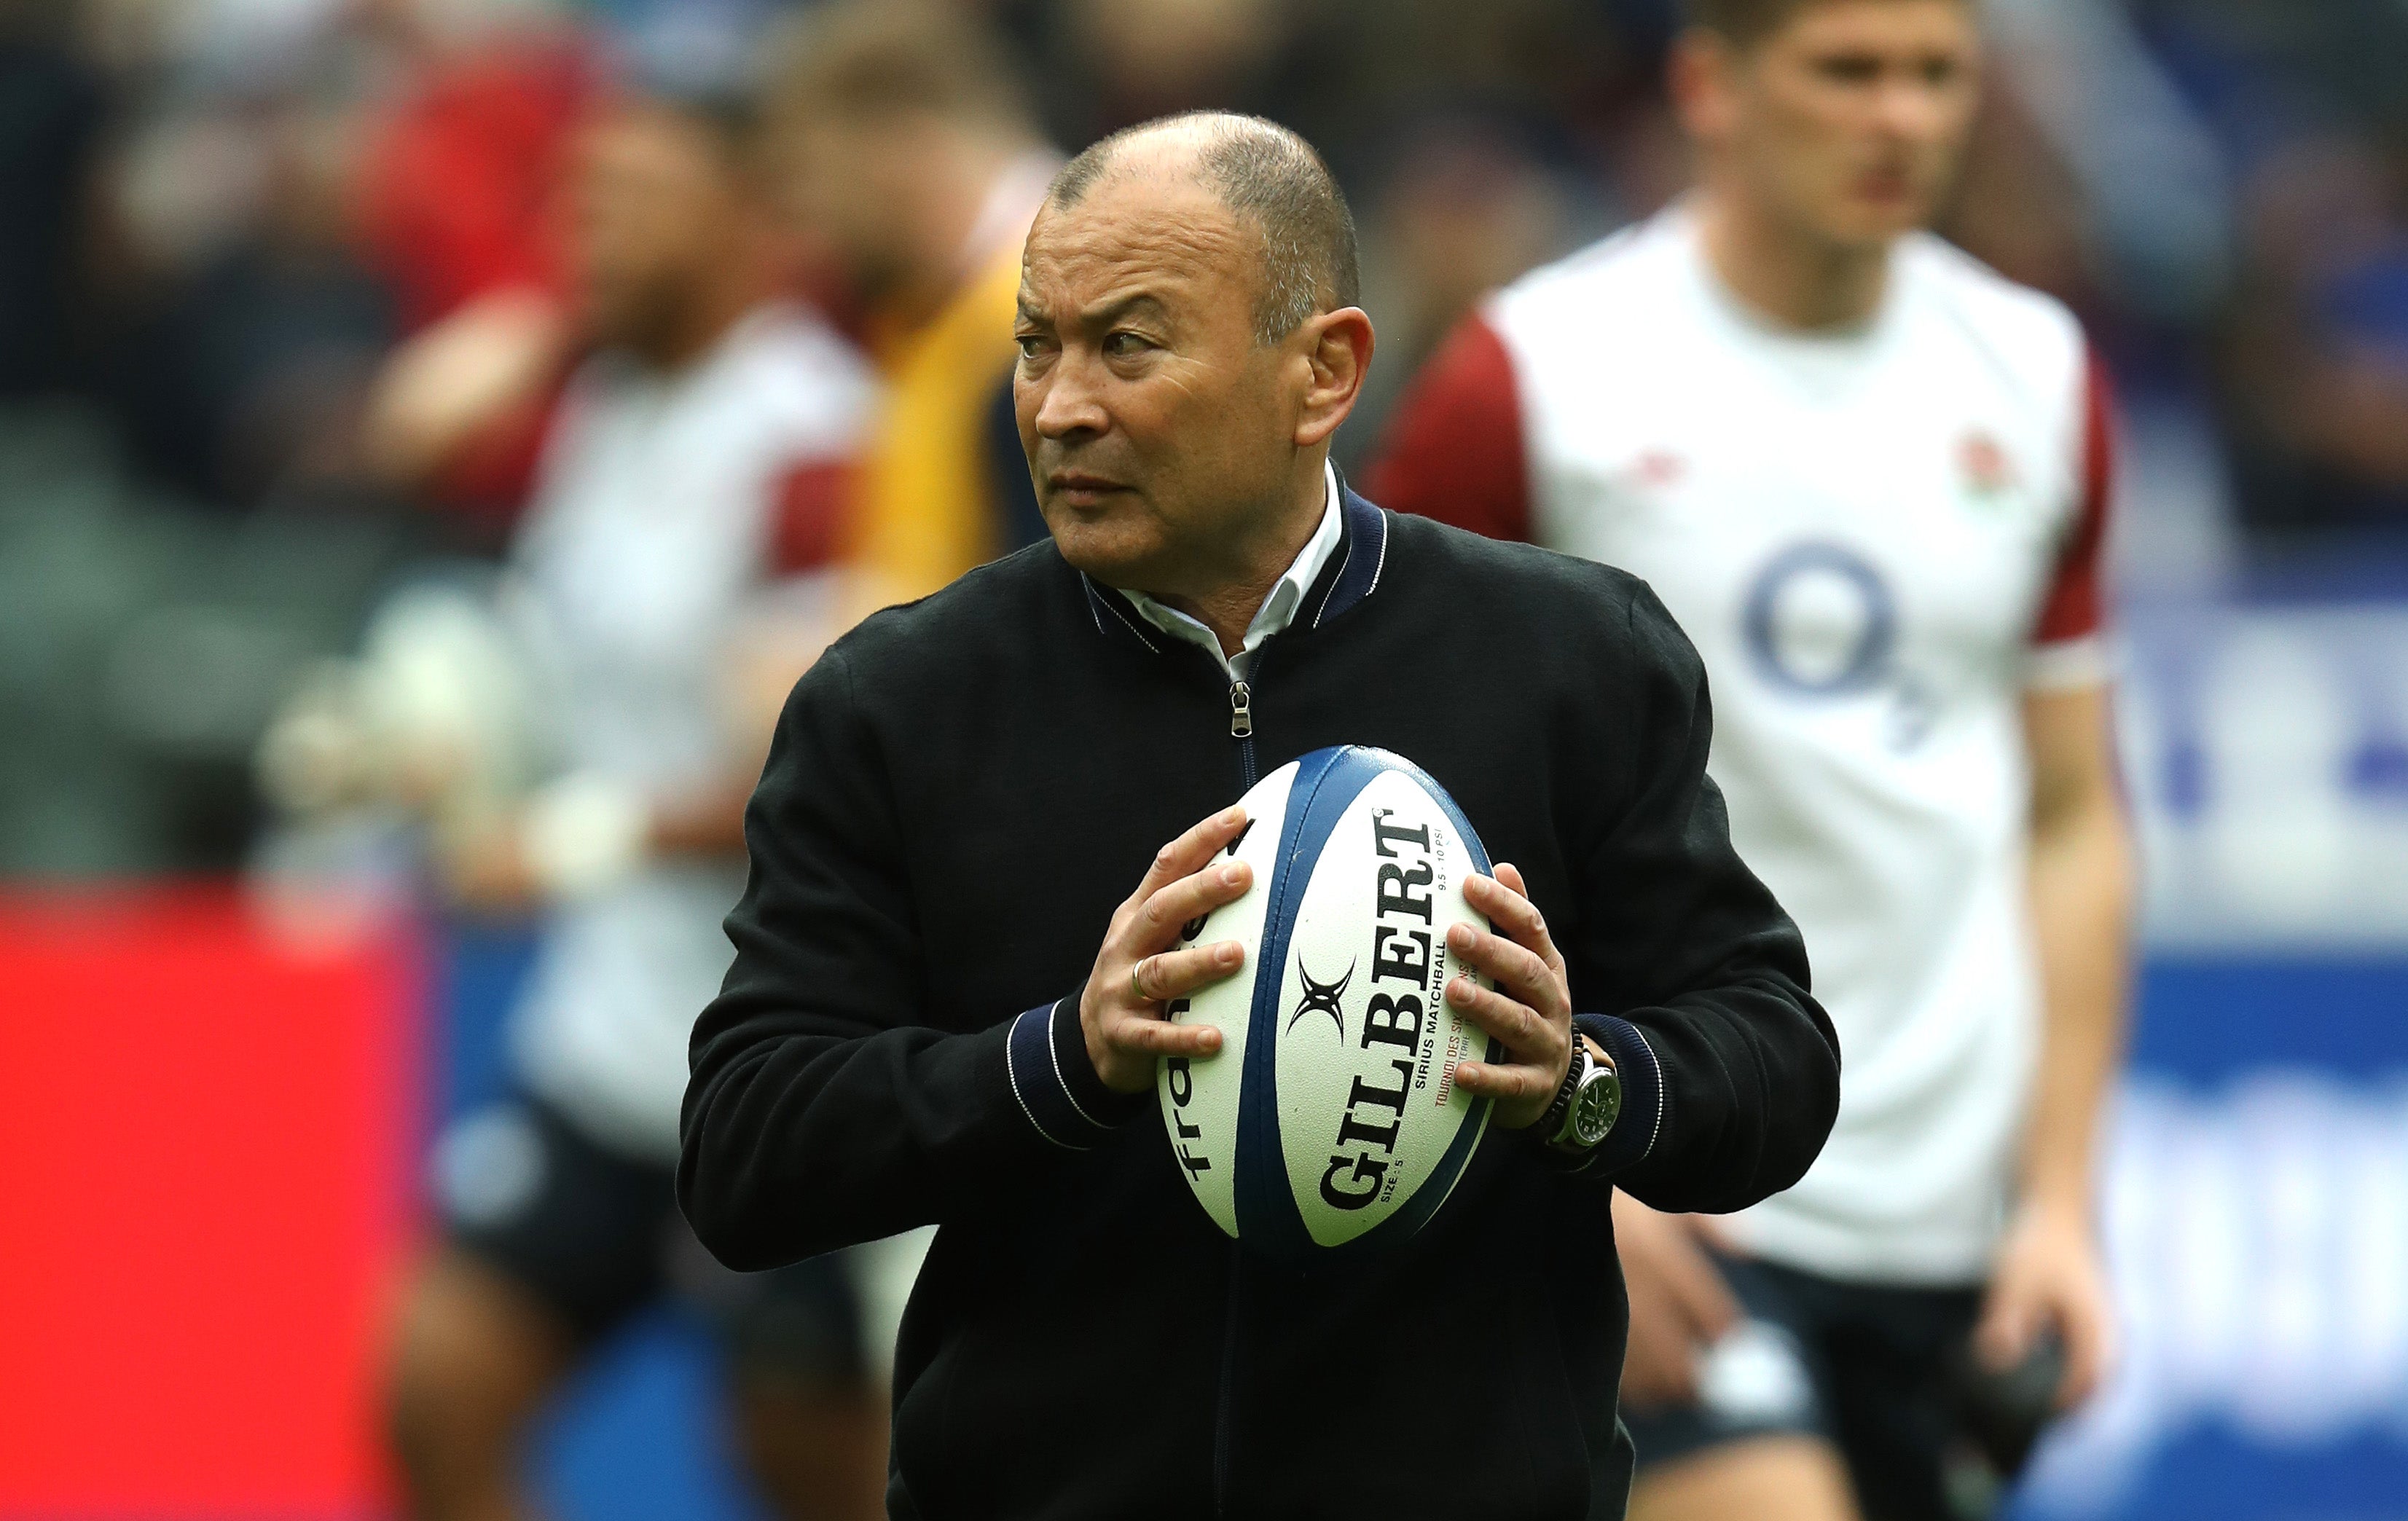 The year began with questions looming over Eddie Jones’s position that have completely evaporated today